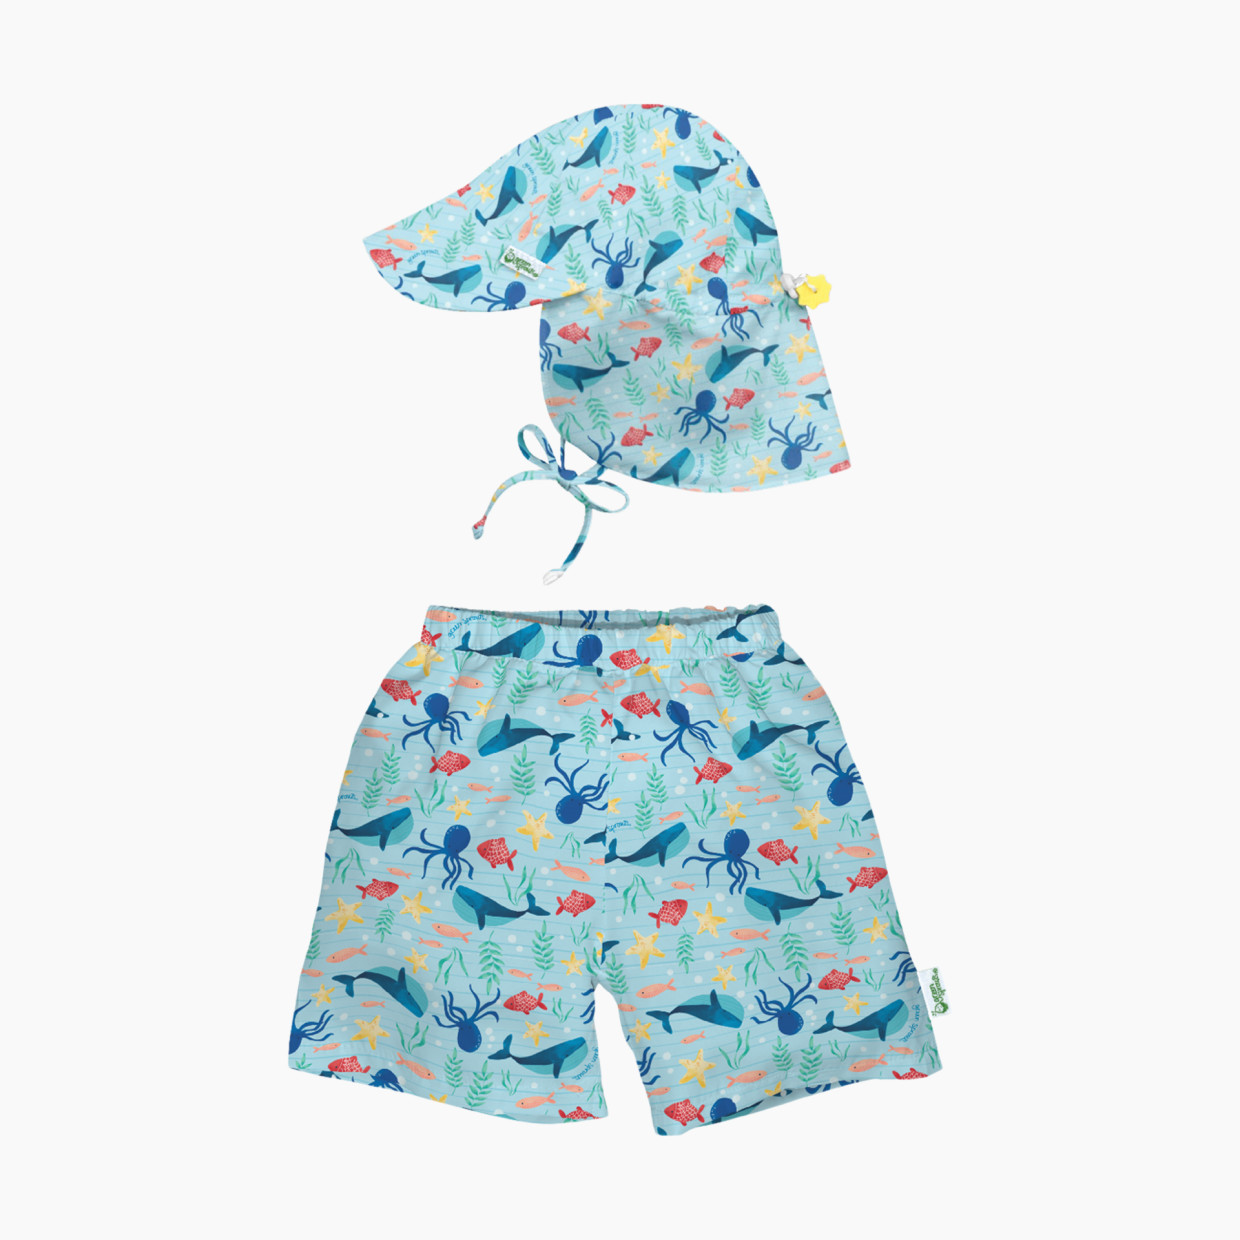 GREEN SPROUTS UPF 50+ Swim Trunks with Built-in Diaper & Hat - Aqua Sea Celebration, 0-6 Months.